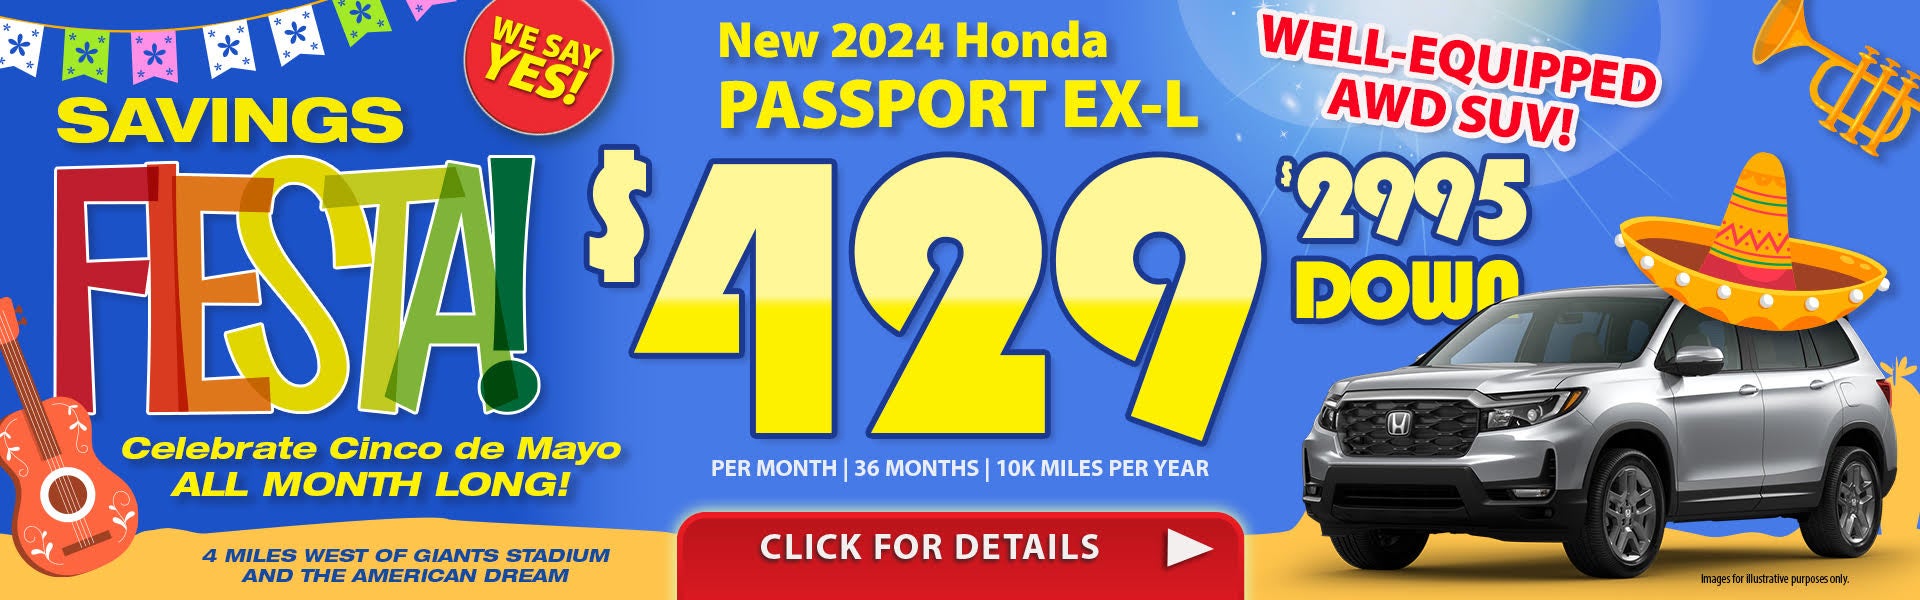 Passport Lease Special